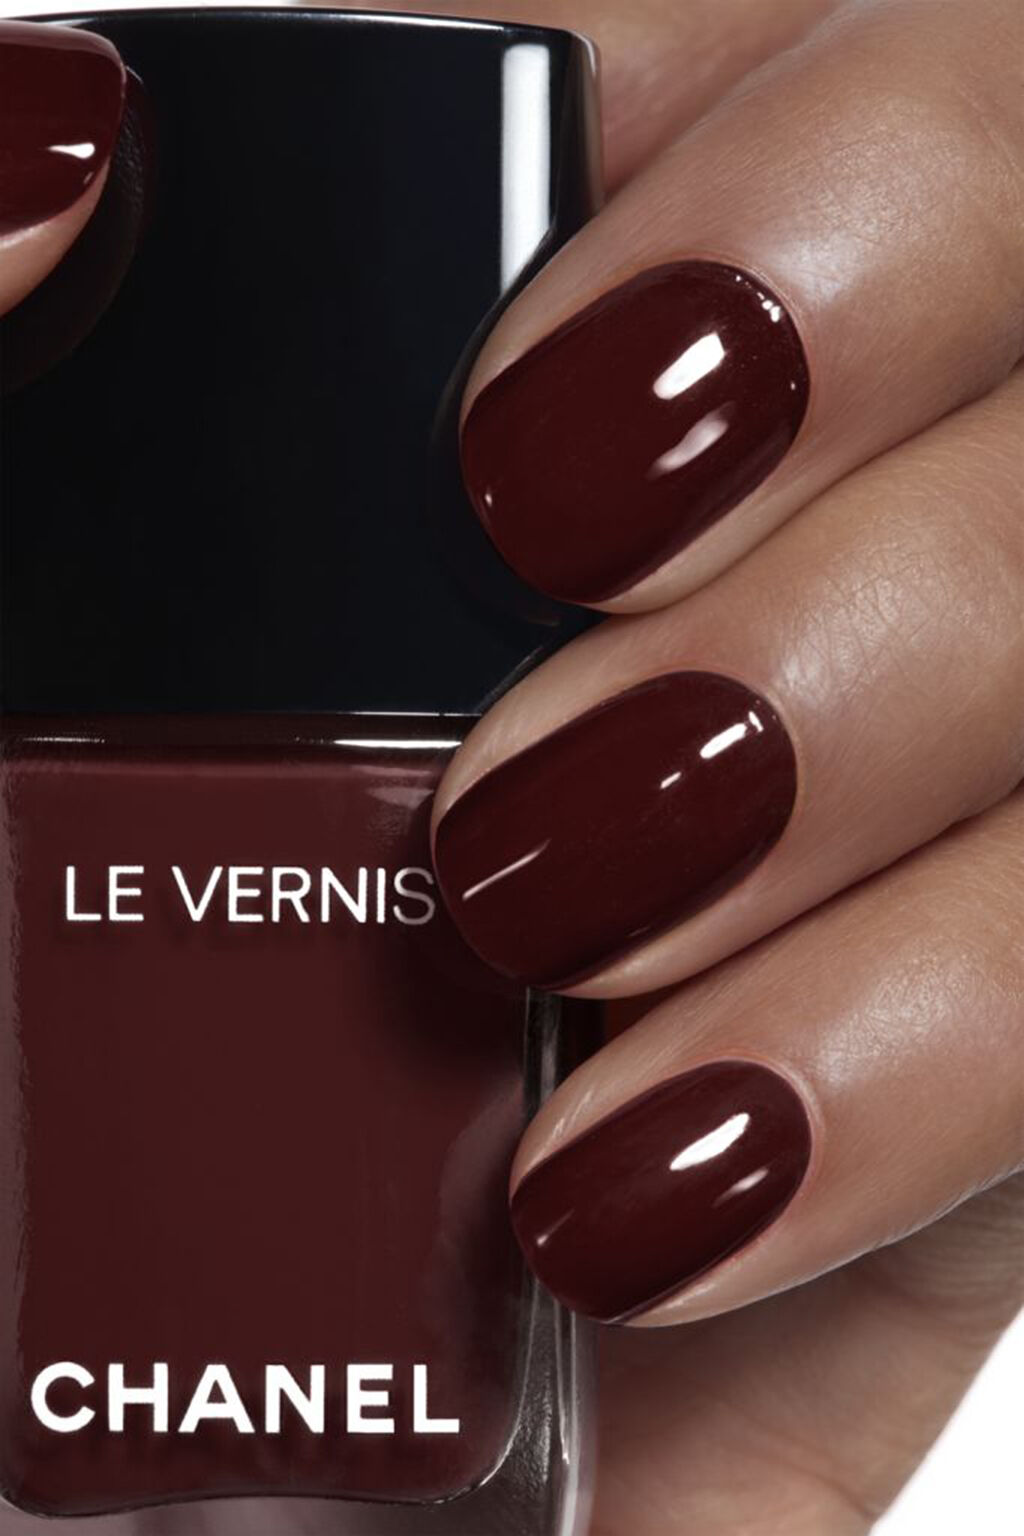 Chanel Terrana 697 Le Vernis Nail Colour Review  Swatches